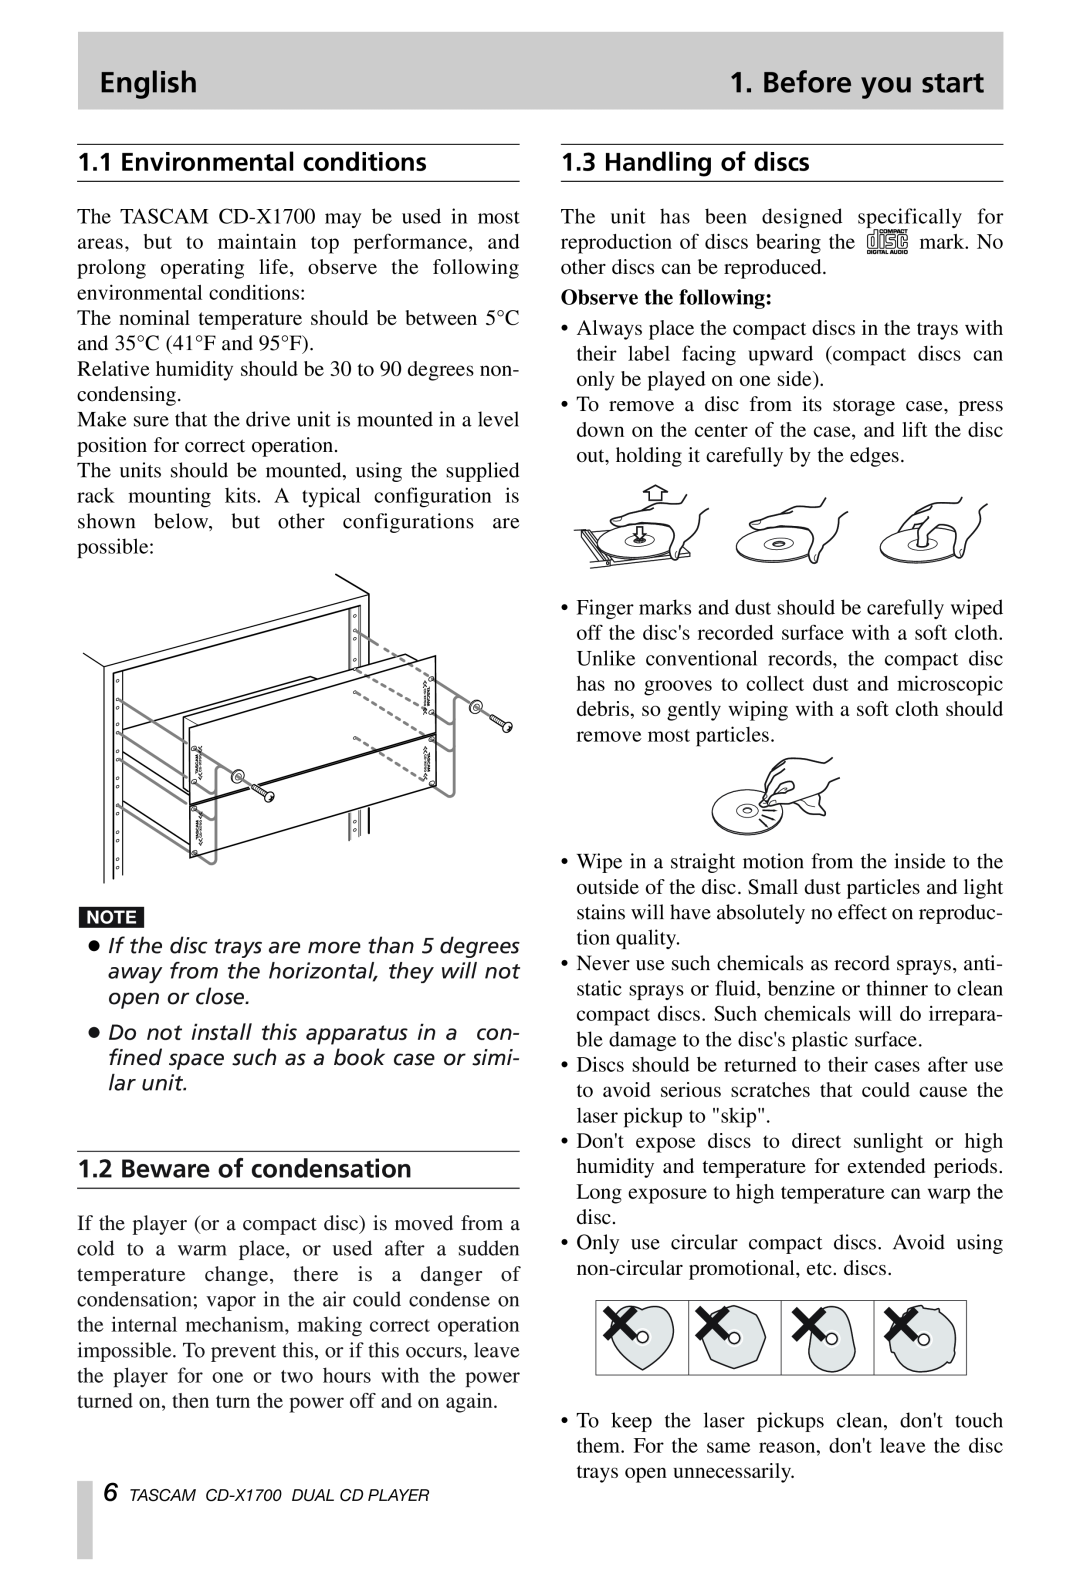 Tascam CD-X1700 owner manual Before you start, Environmental conditions, Beware of condensation, Handling of discs, English 